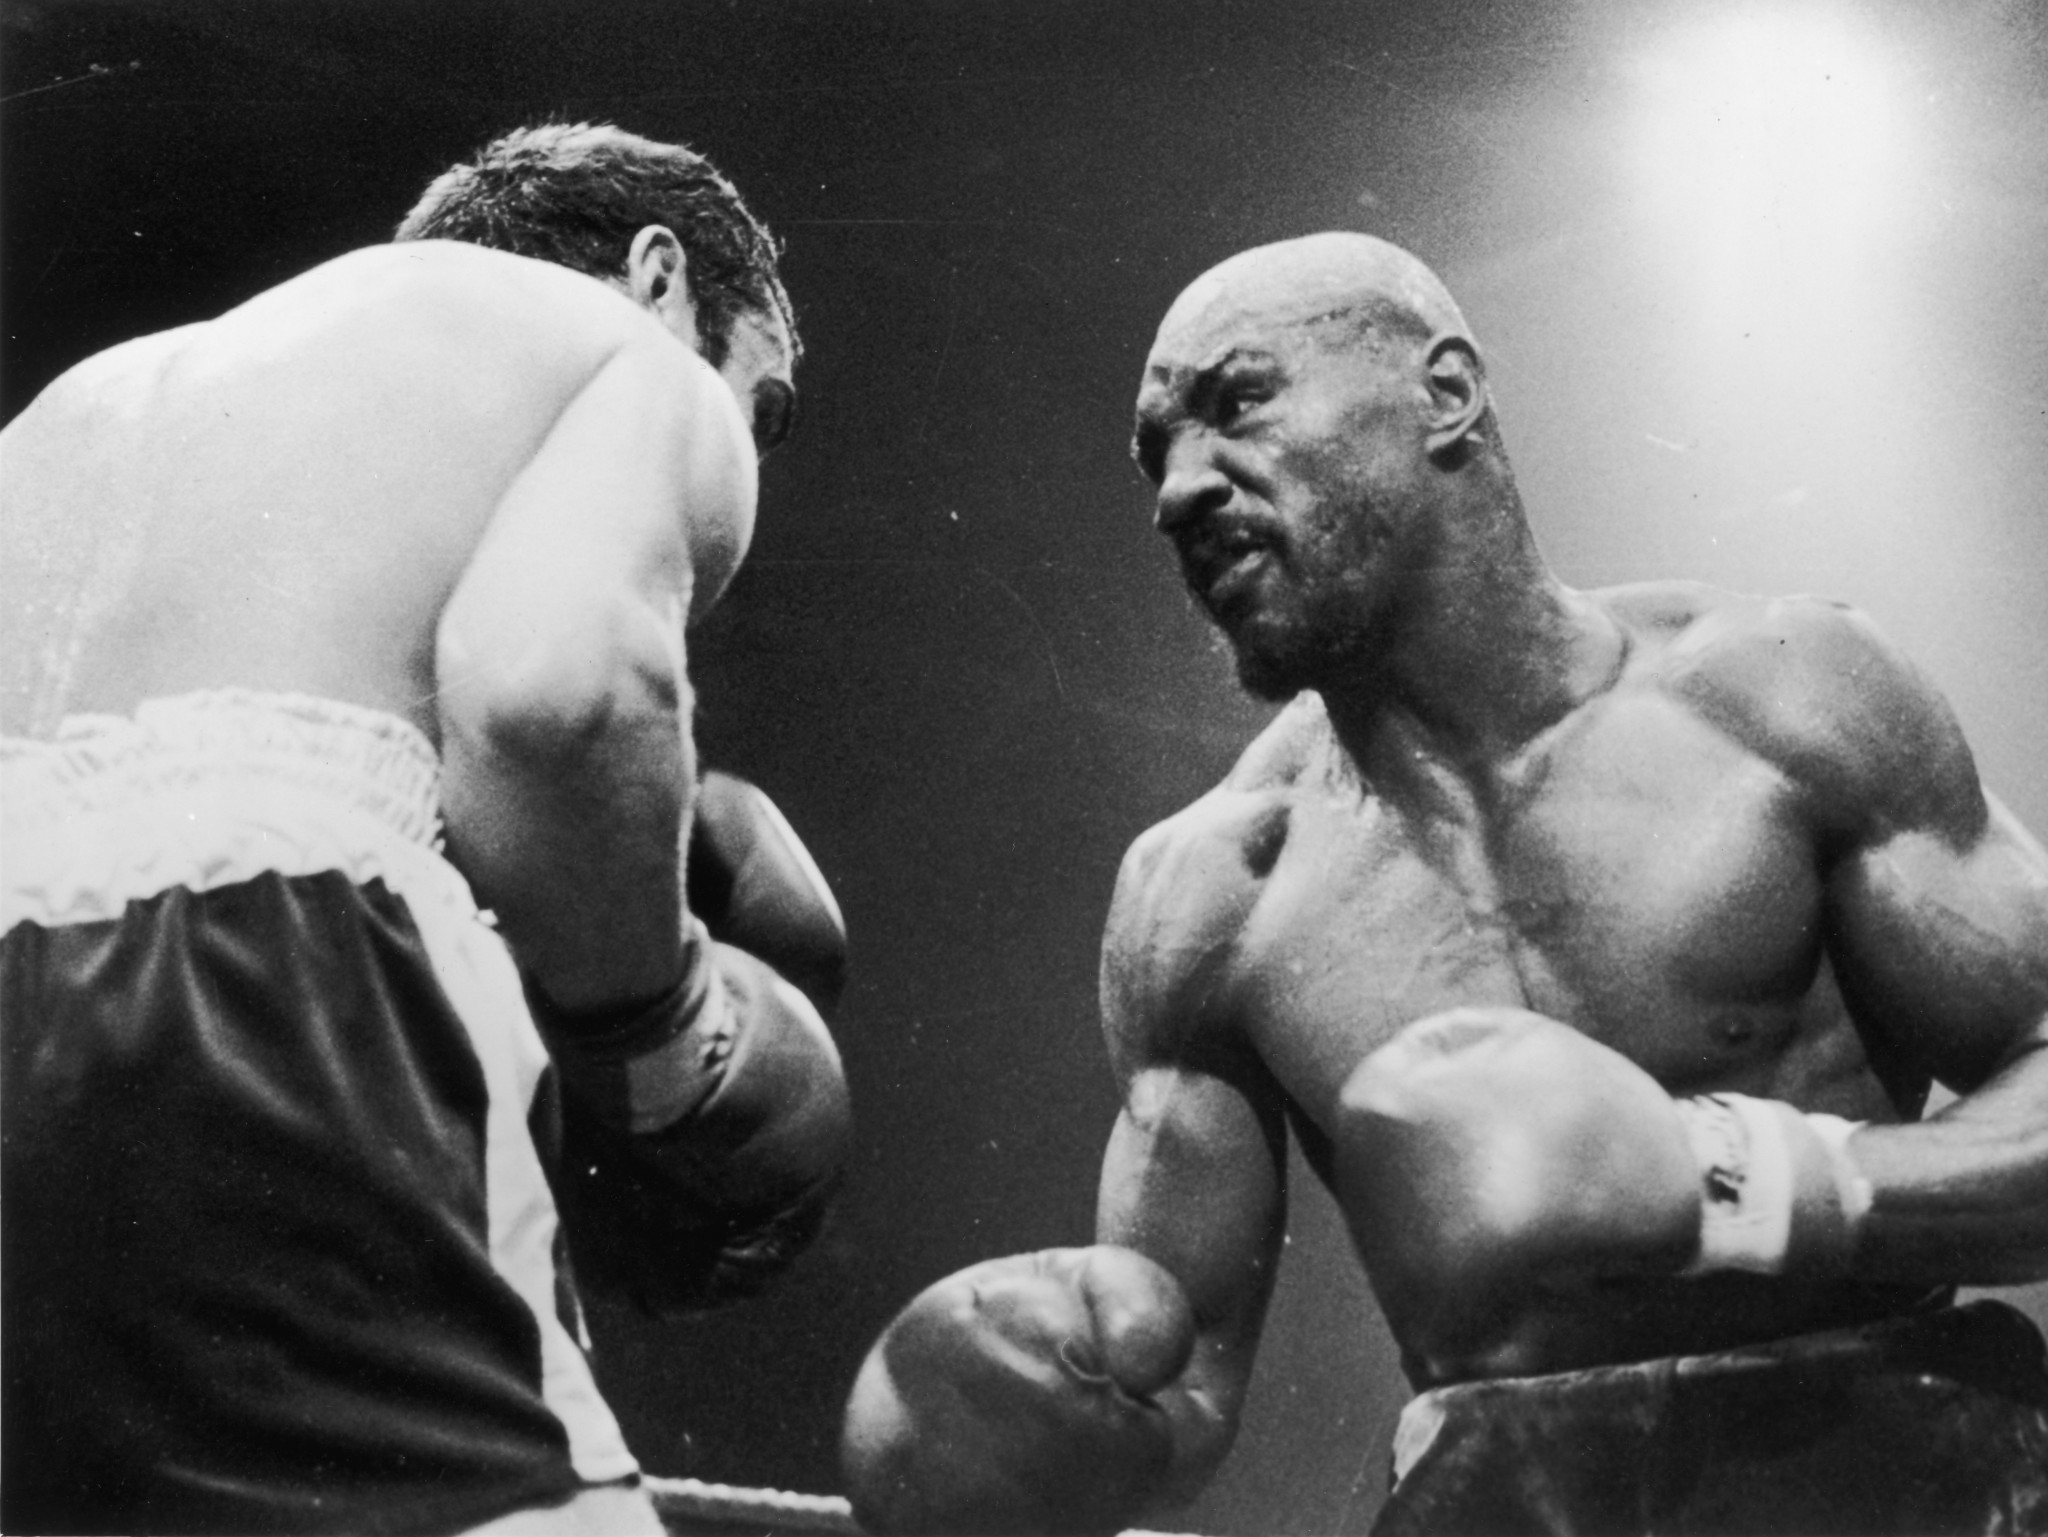 Marvelous Marvin Hagler stopped Alan Minter in three rounds following the latter's infamous remark ©Getty Images